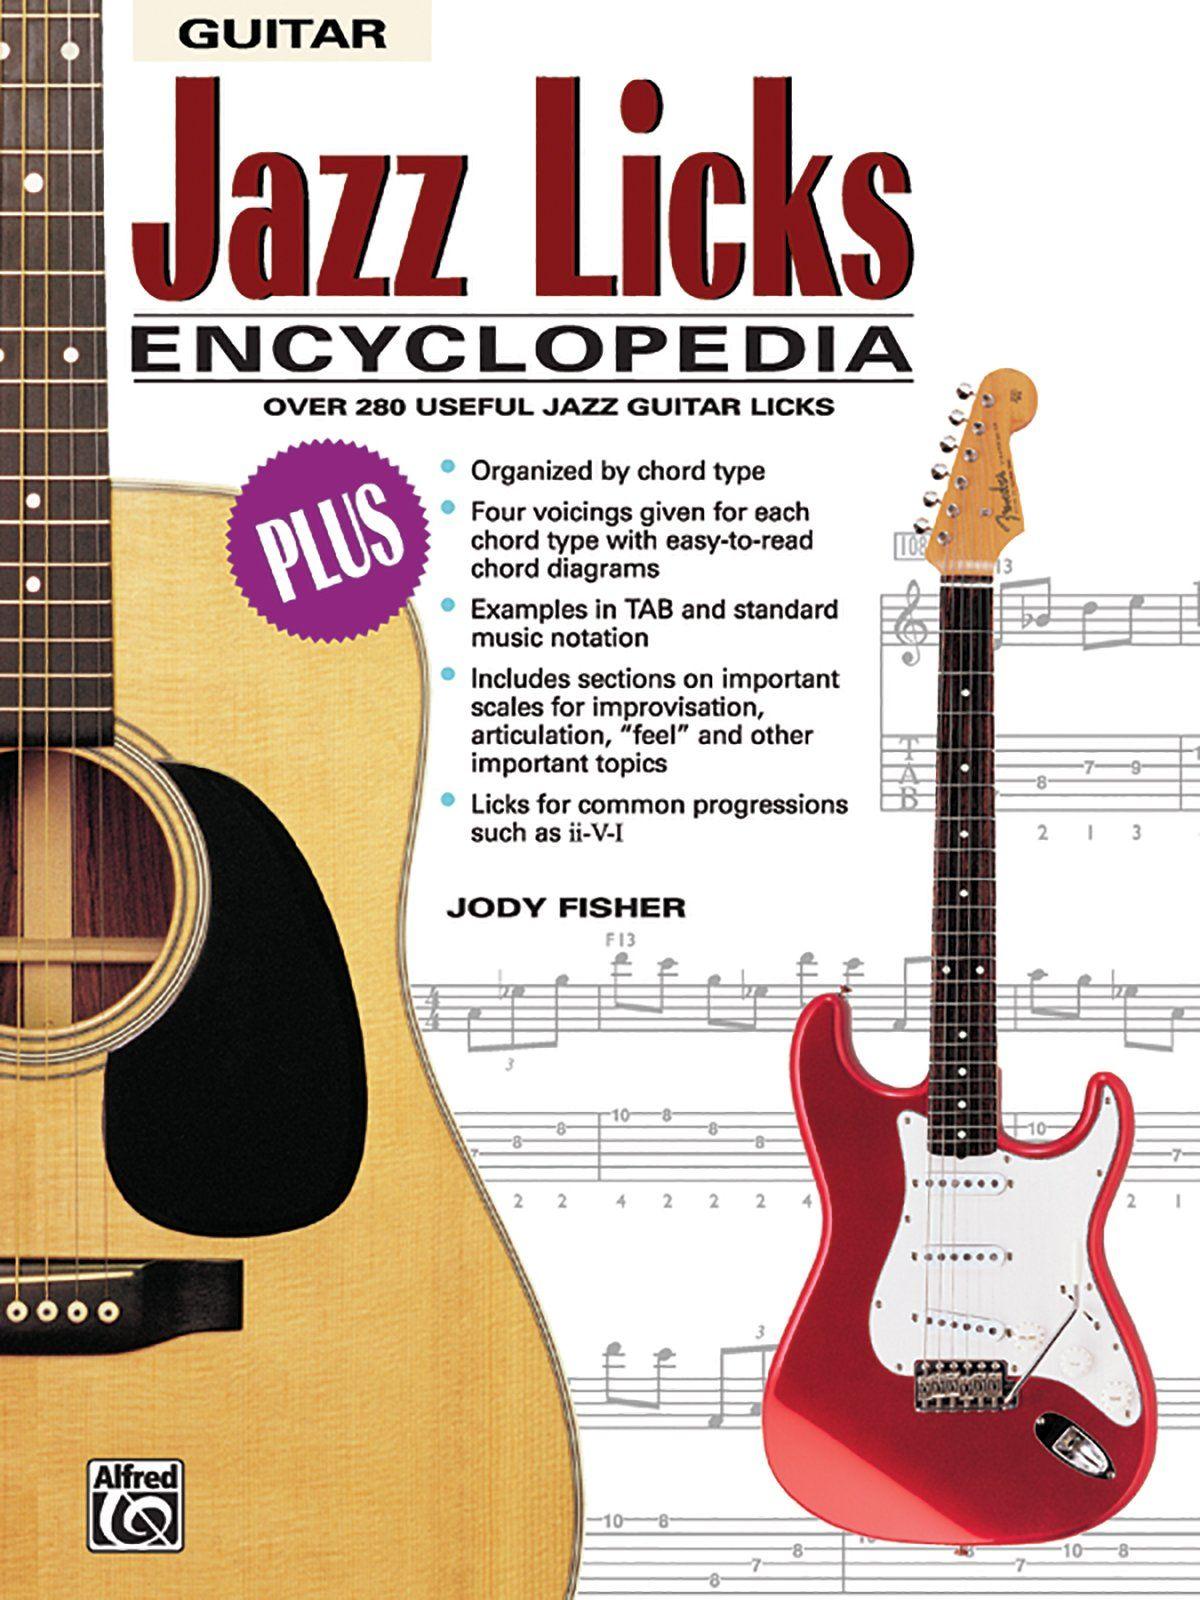 SWAT reccomend 101 easy guitarists jazz know lick must quick reference